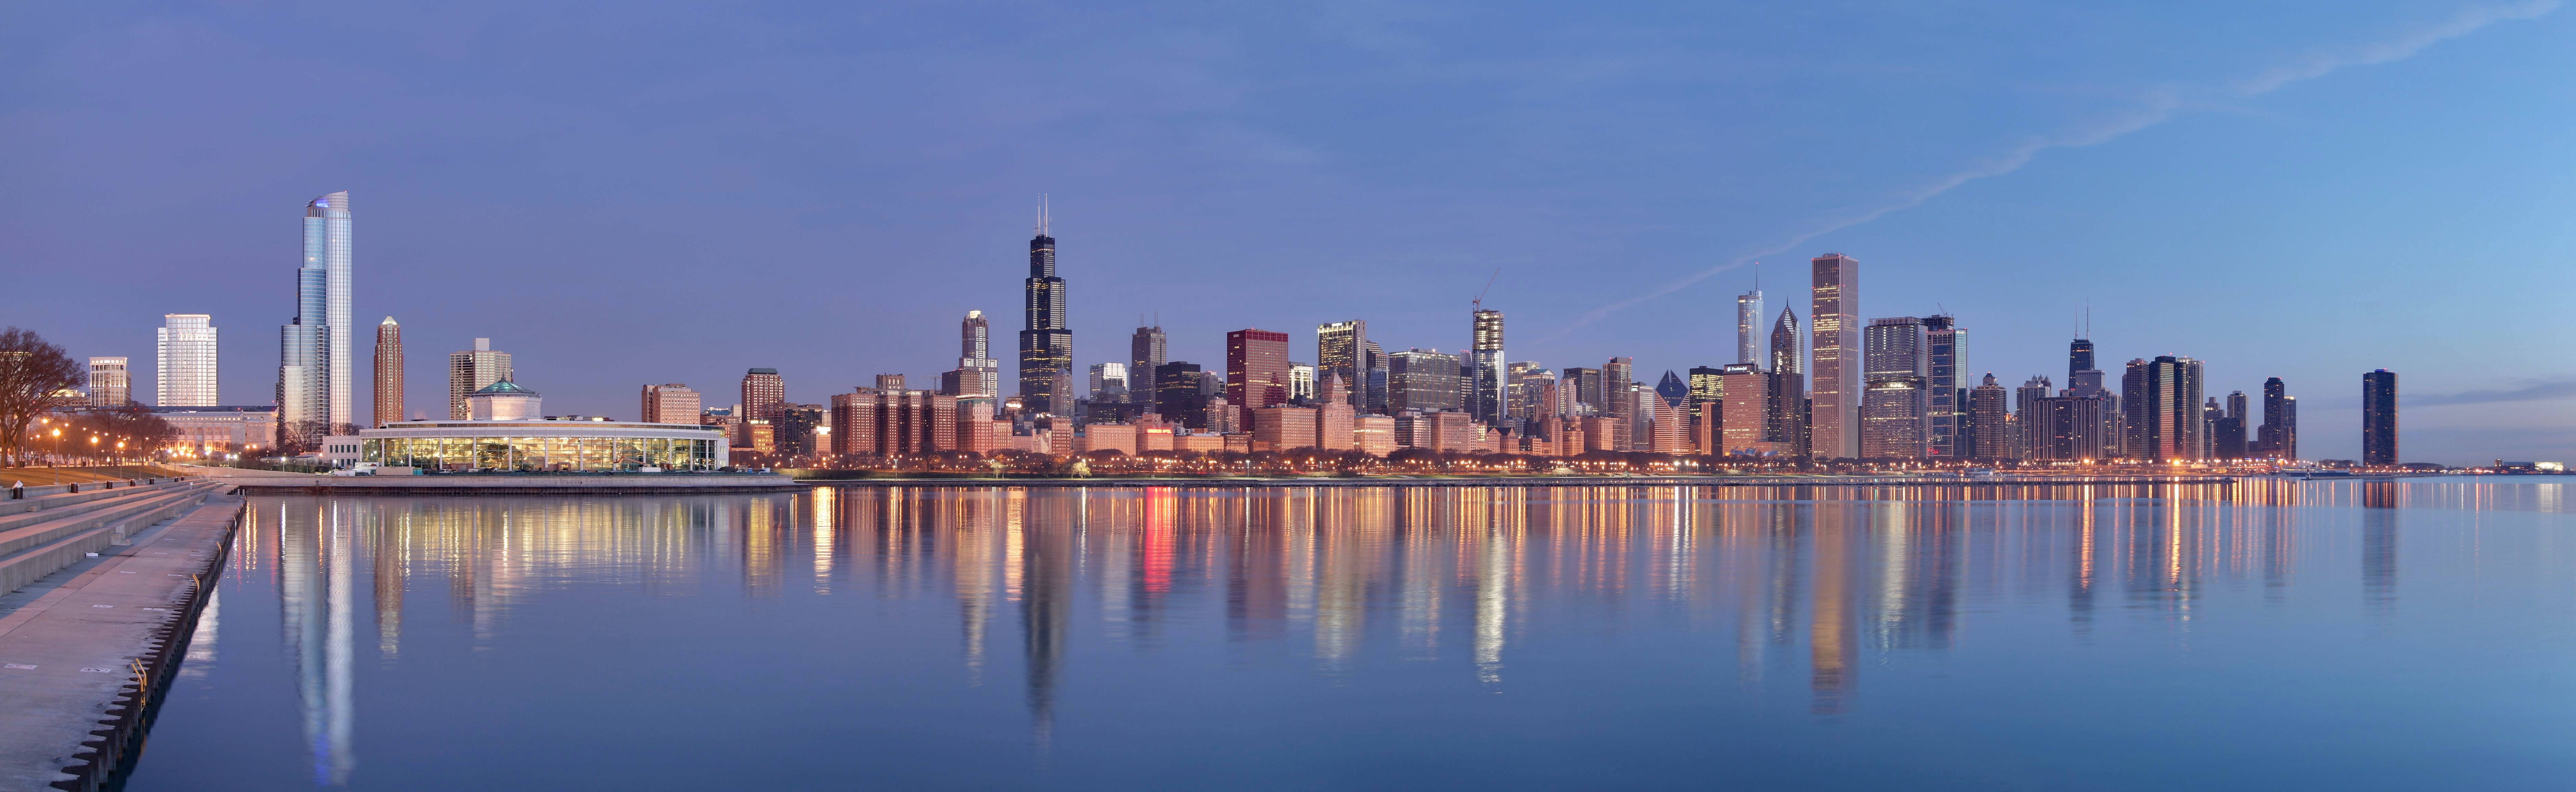 PHOTO- CHICAGO – PANORAMA OF THE CITY FROM THE ADLER PLANETARIUM ...